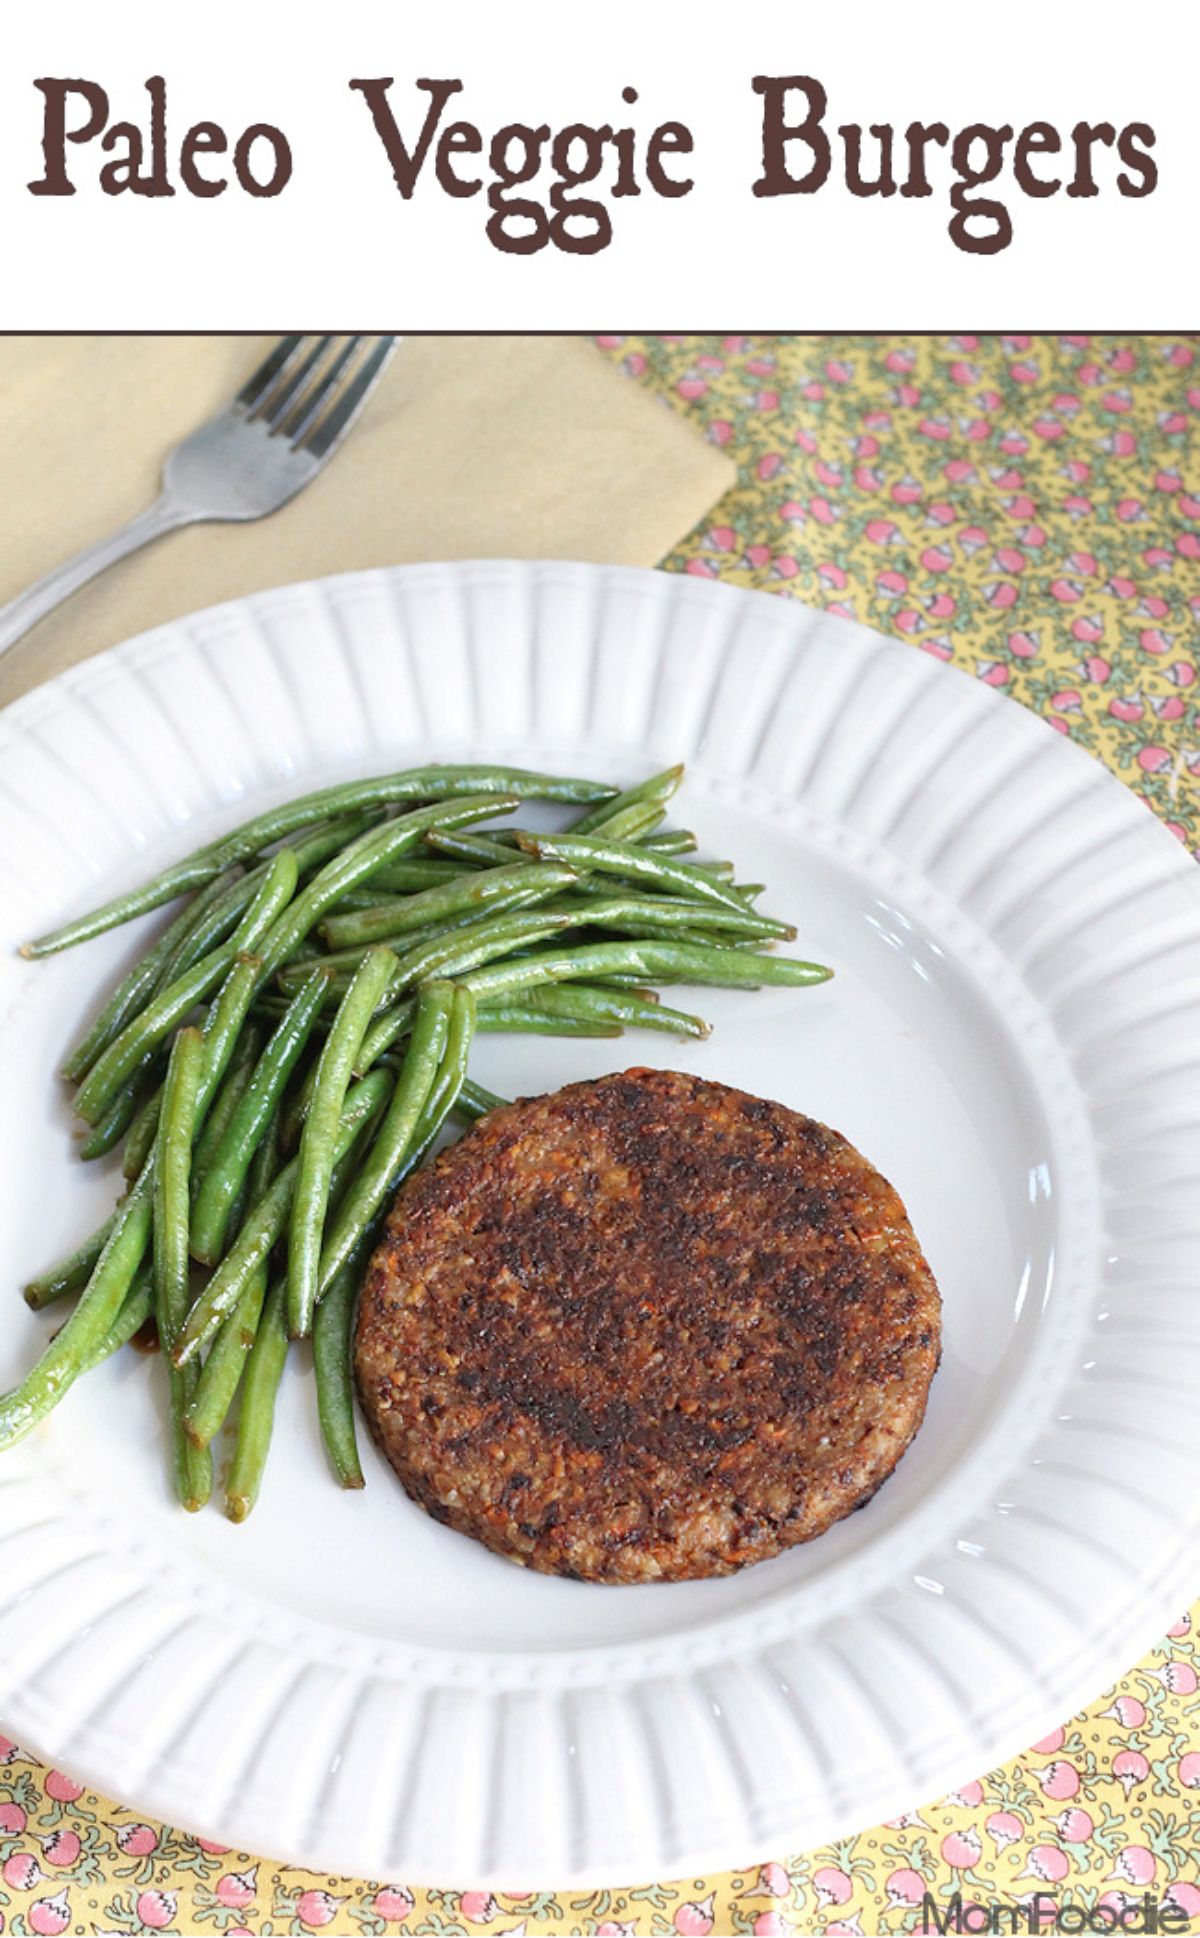 The text reads "Paleo Veggie Burgers". The photo is a white plate with green beans and a veggie burger on it